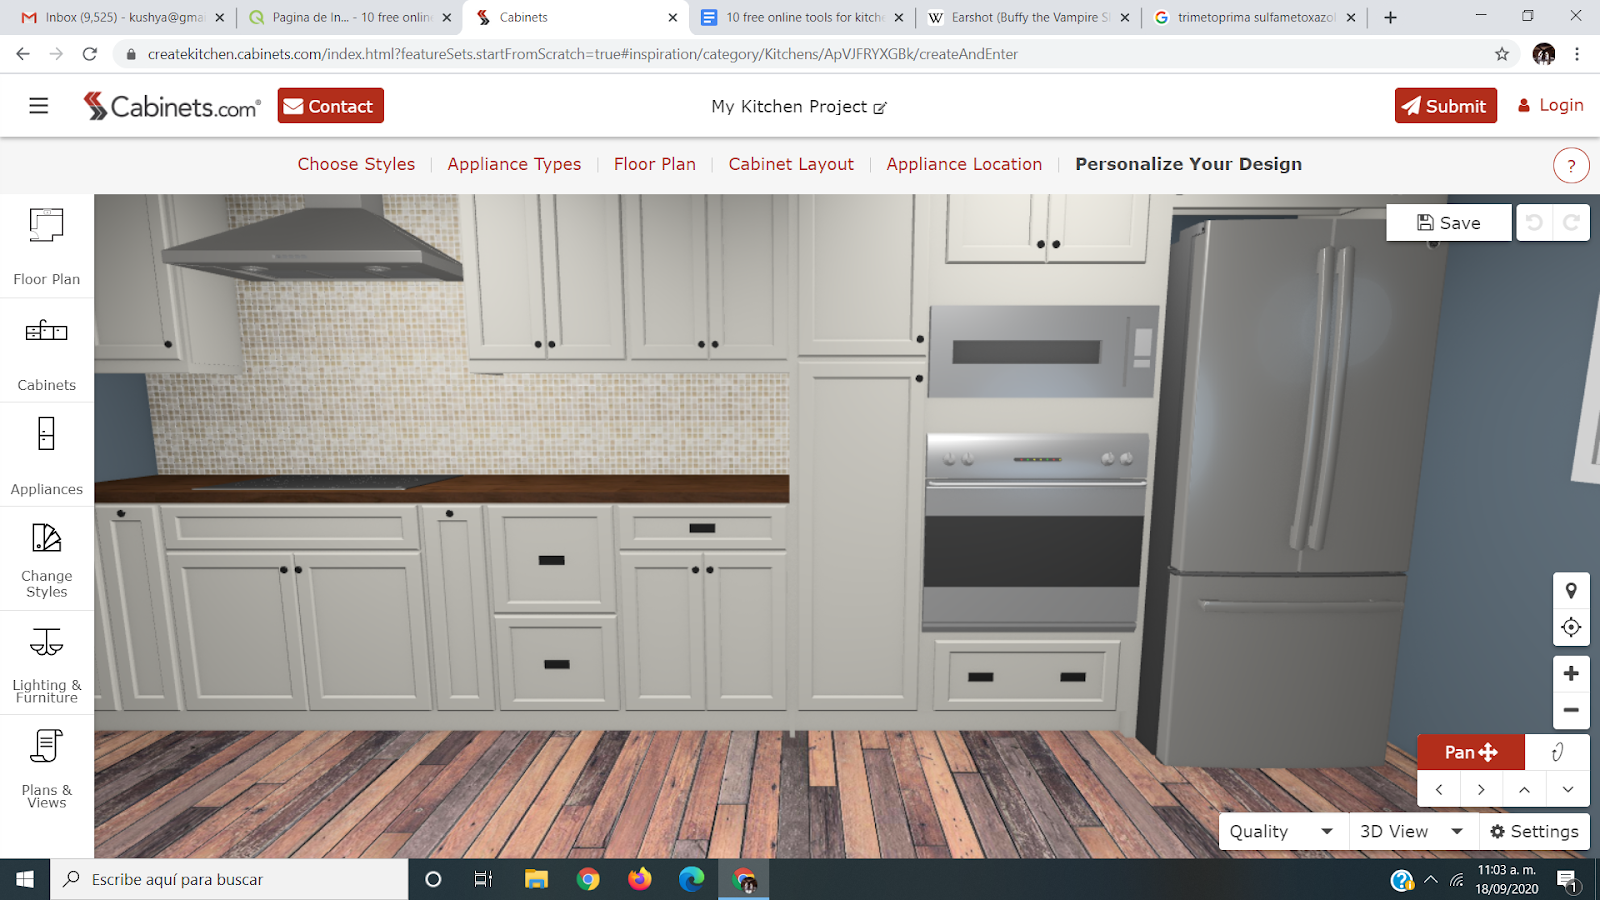 20 free online tools for kitchen design – 20D Really